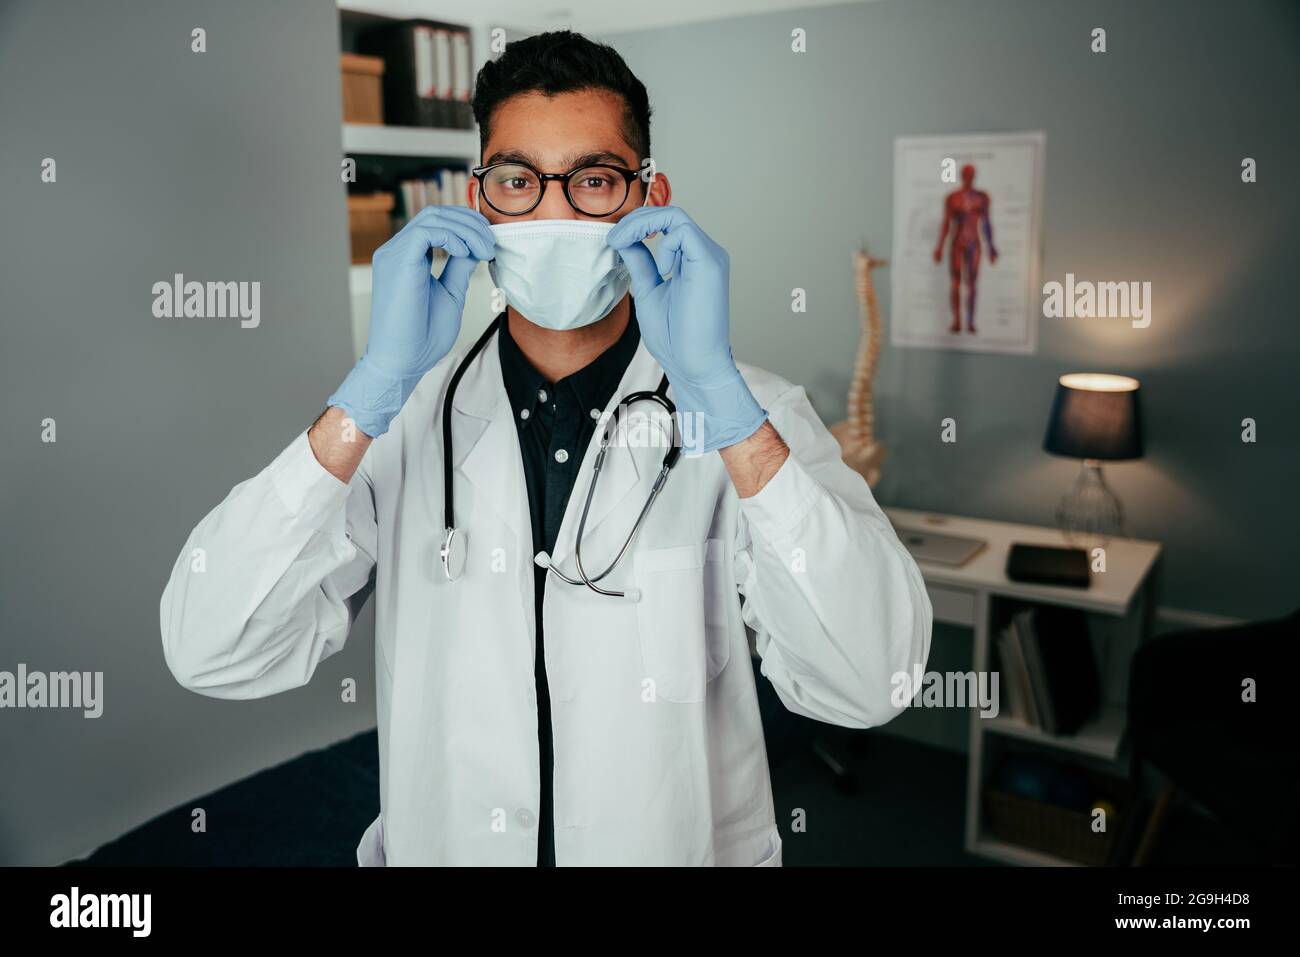 Mixed race male doctor working in office wearing surgical mask Stock Photo